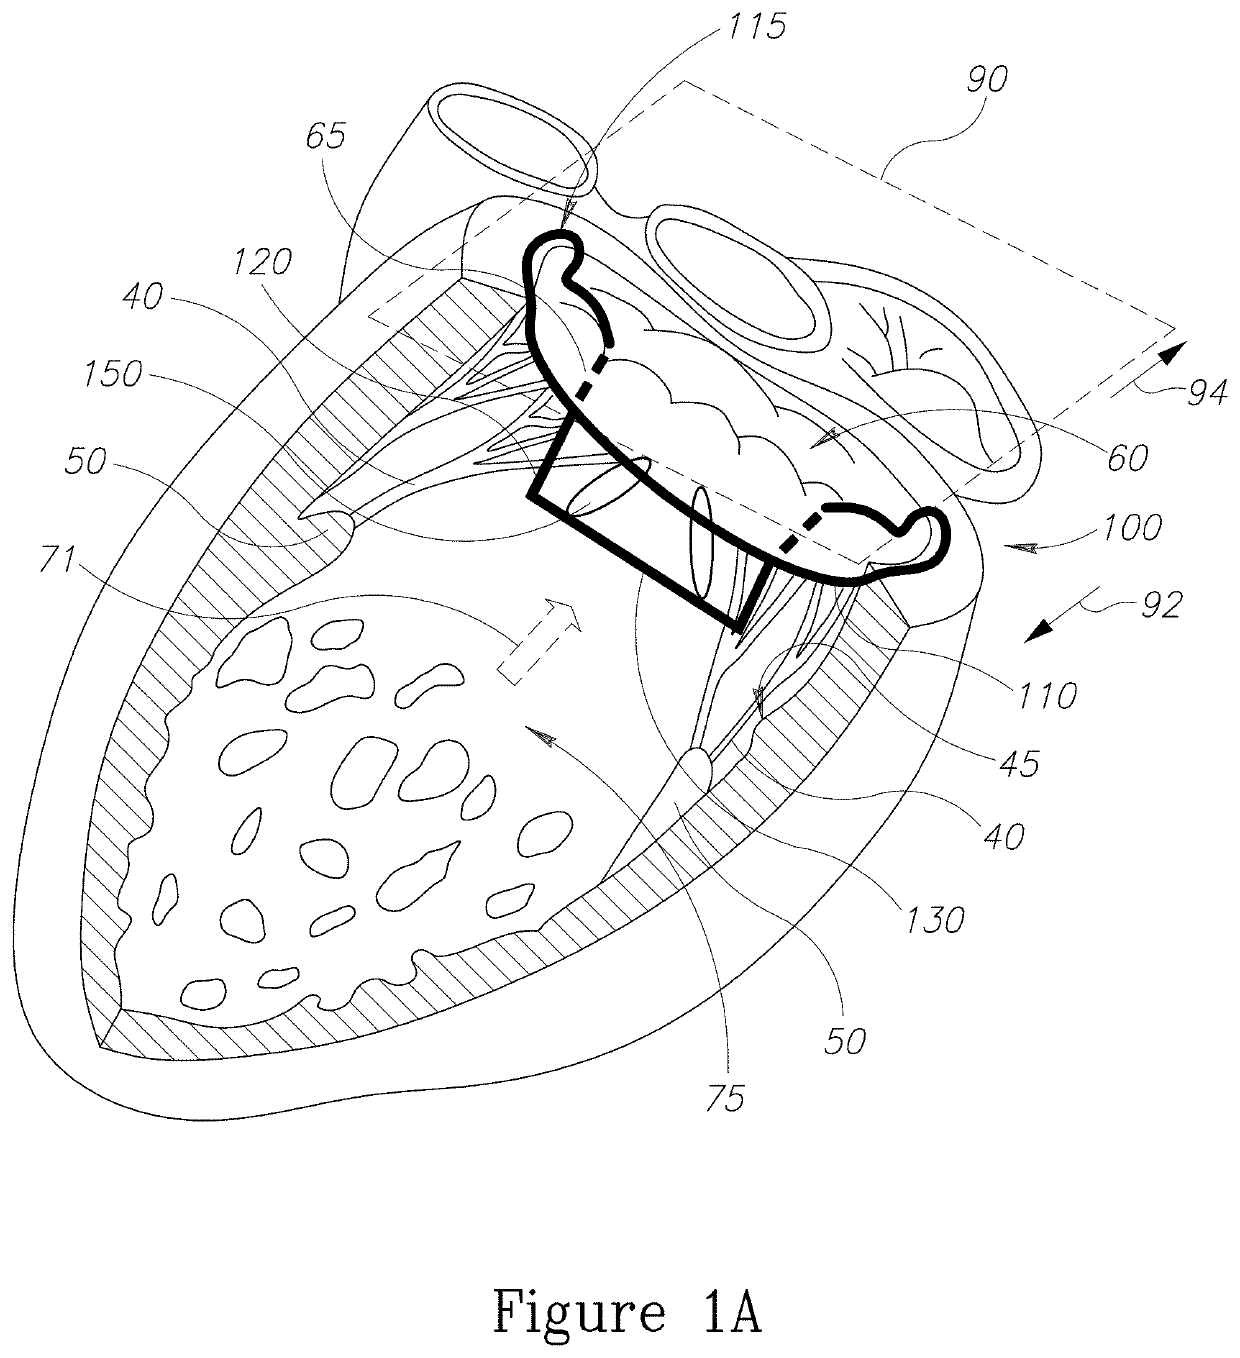 Devices and implantation methods for treating mitral valve condition